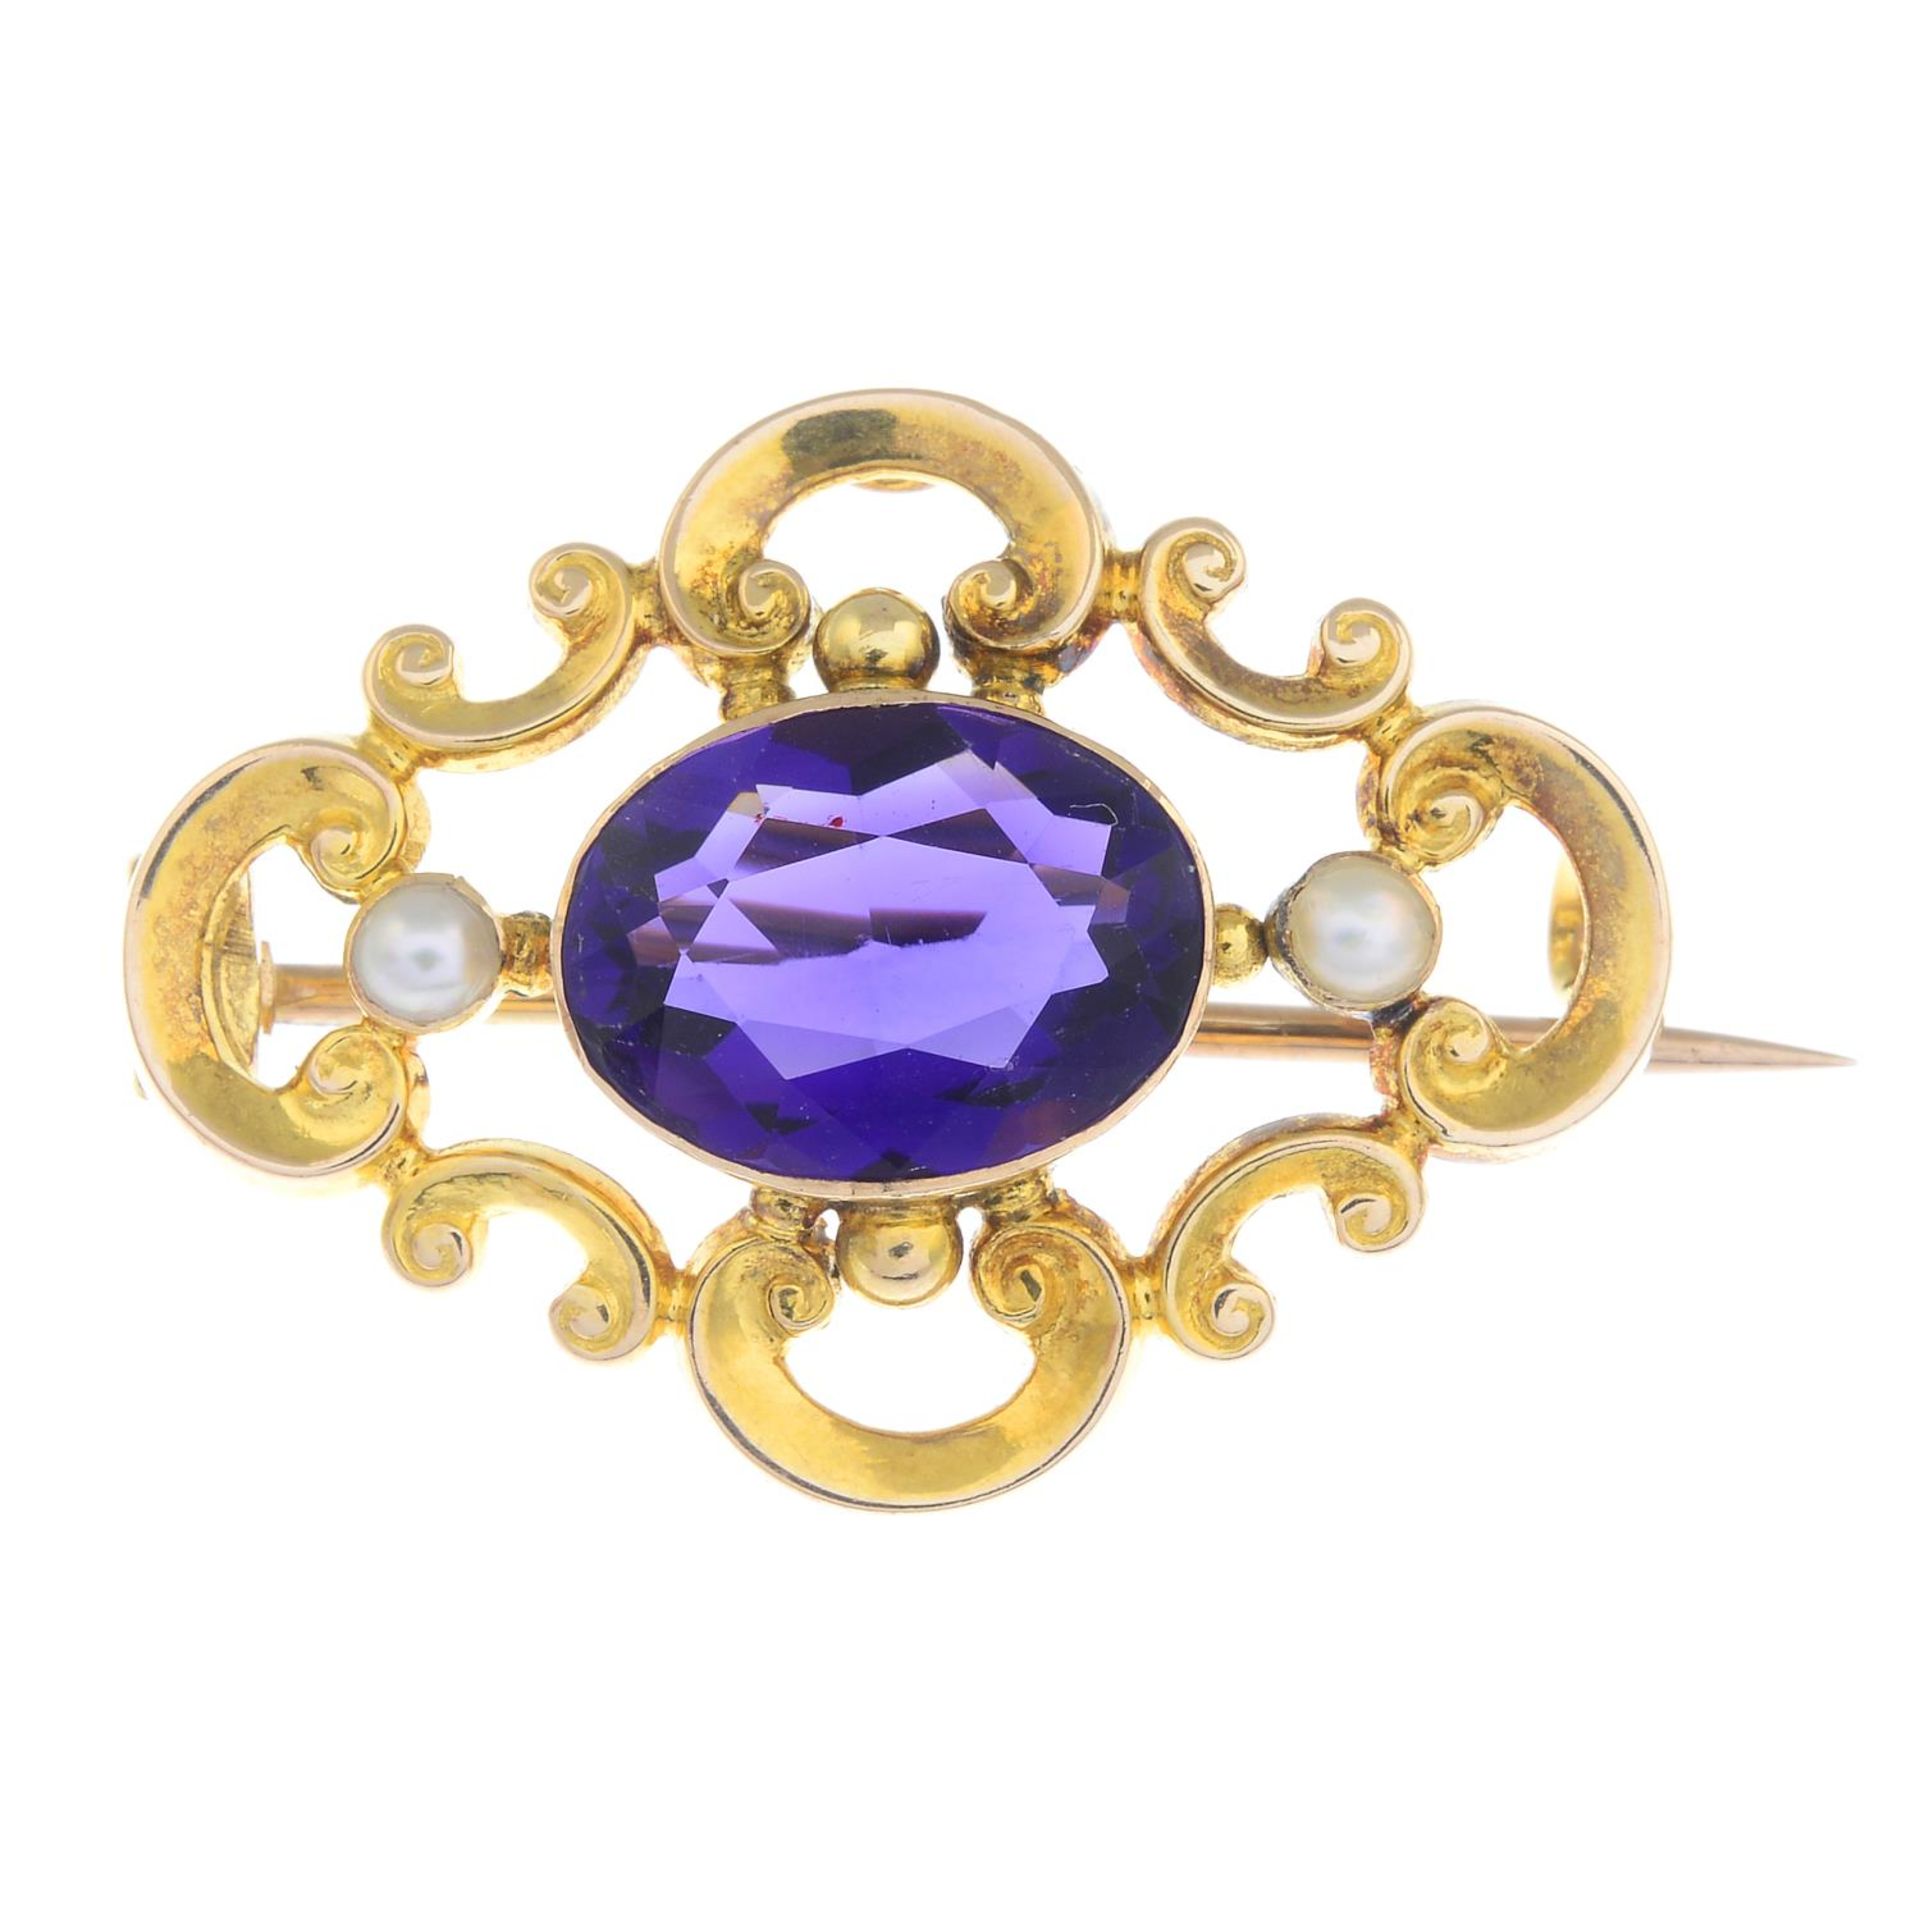 An early 20th century 15ct gold amethyst and split pearl openwork brooch.Stamped 15CT.